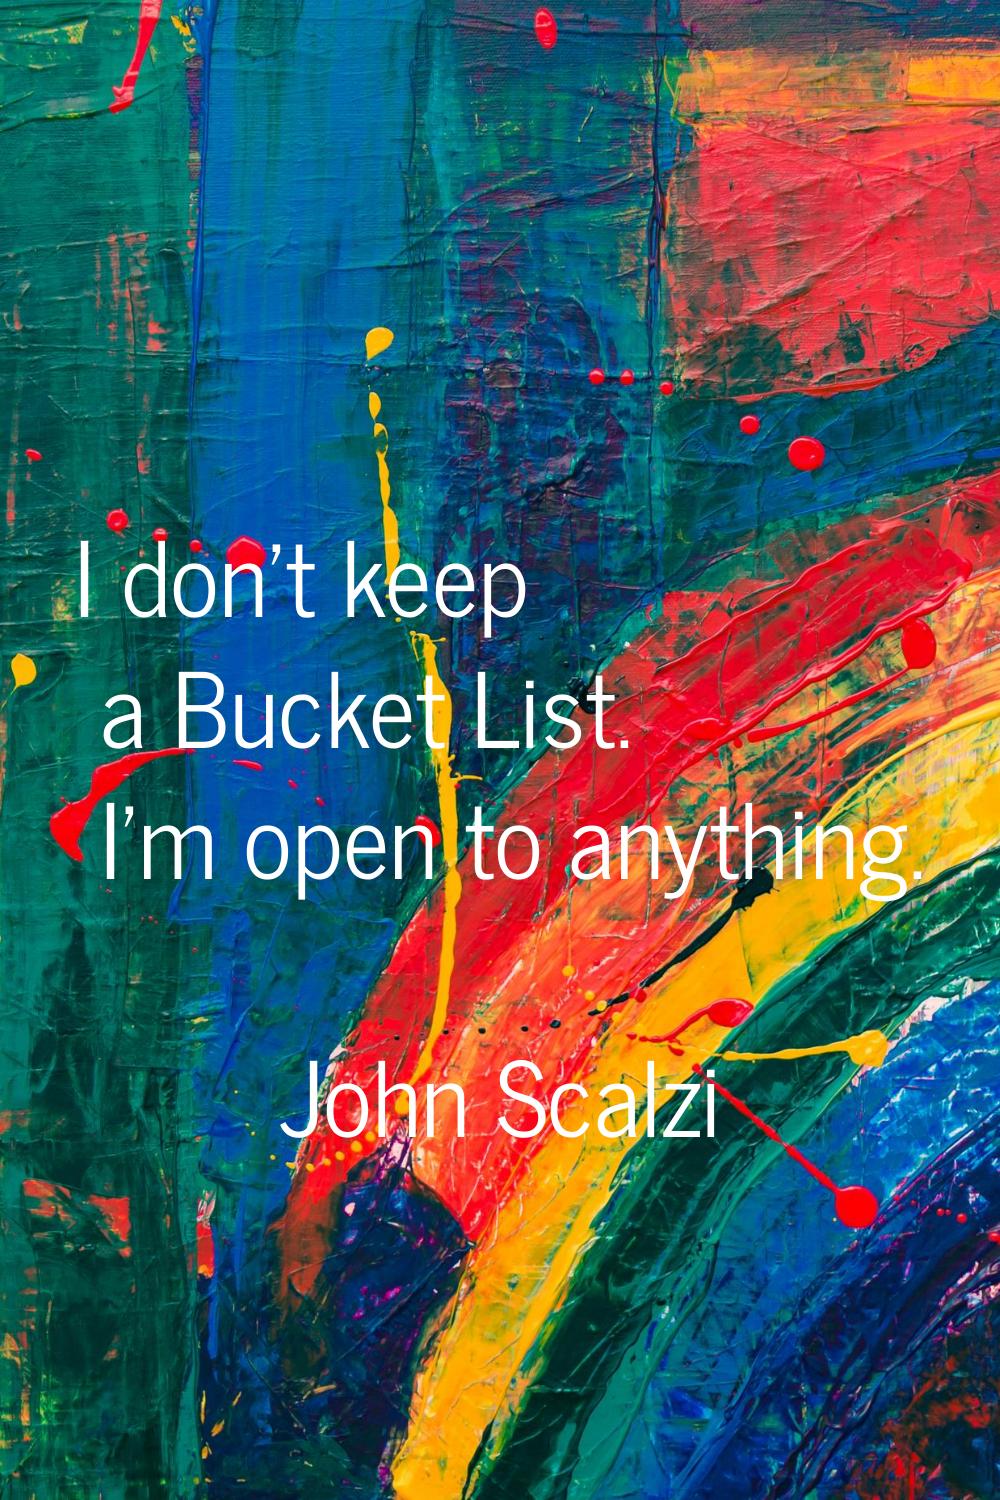 I don't keep a Bucket List. I'm open to anything.